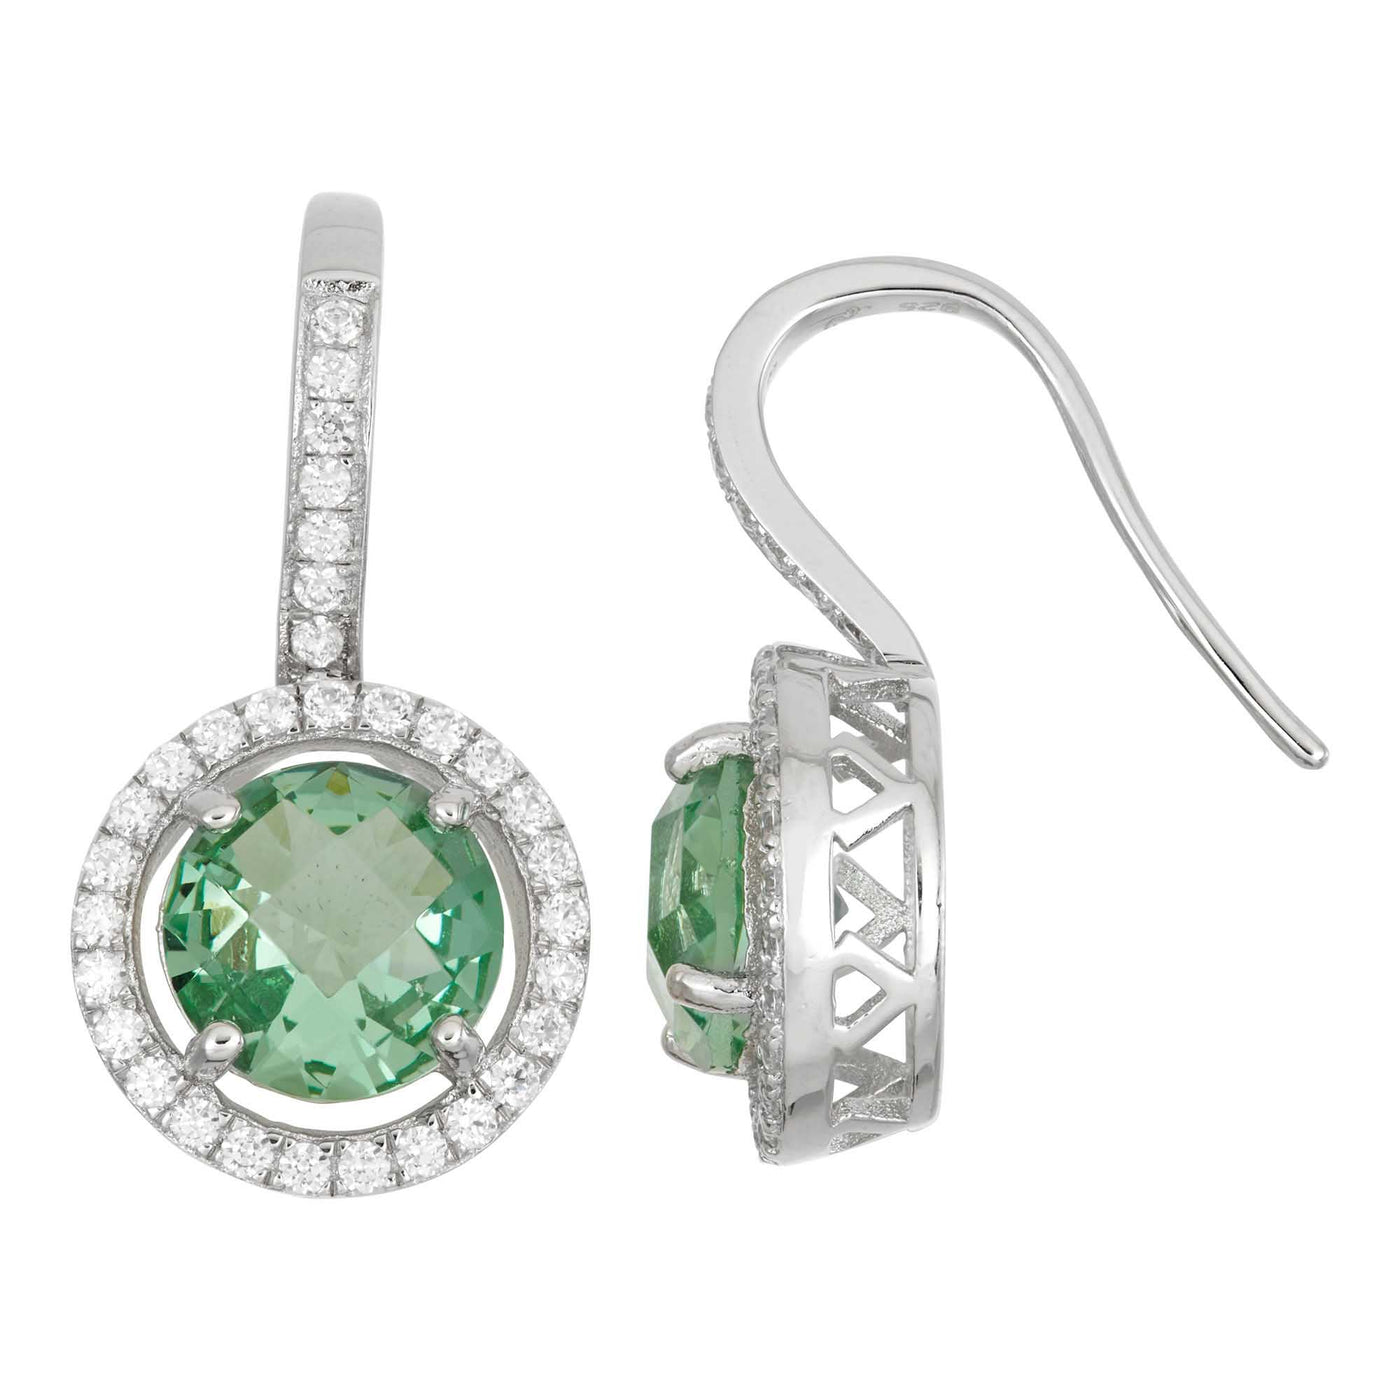 Rebecca Sloane Silver Drop Earring with Green Obsidian and CZ